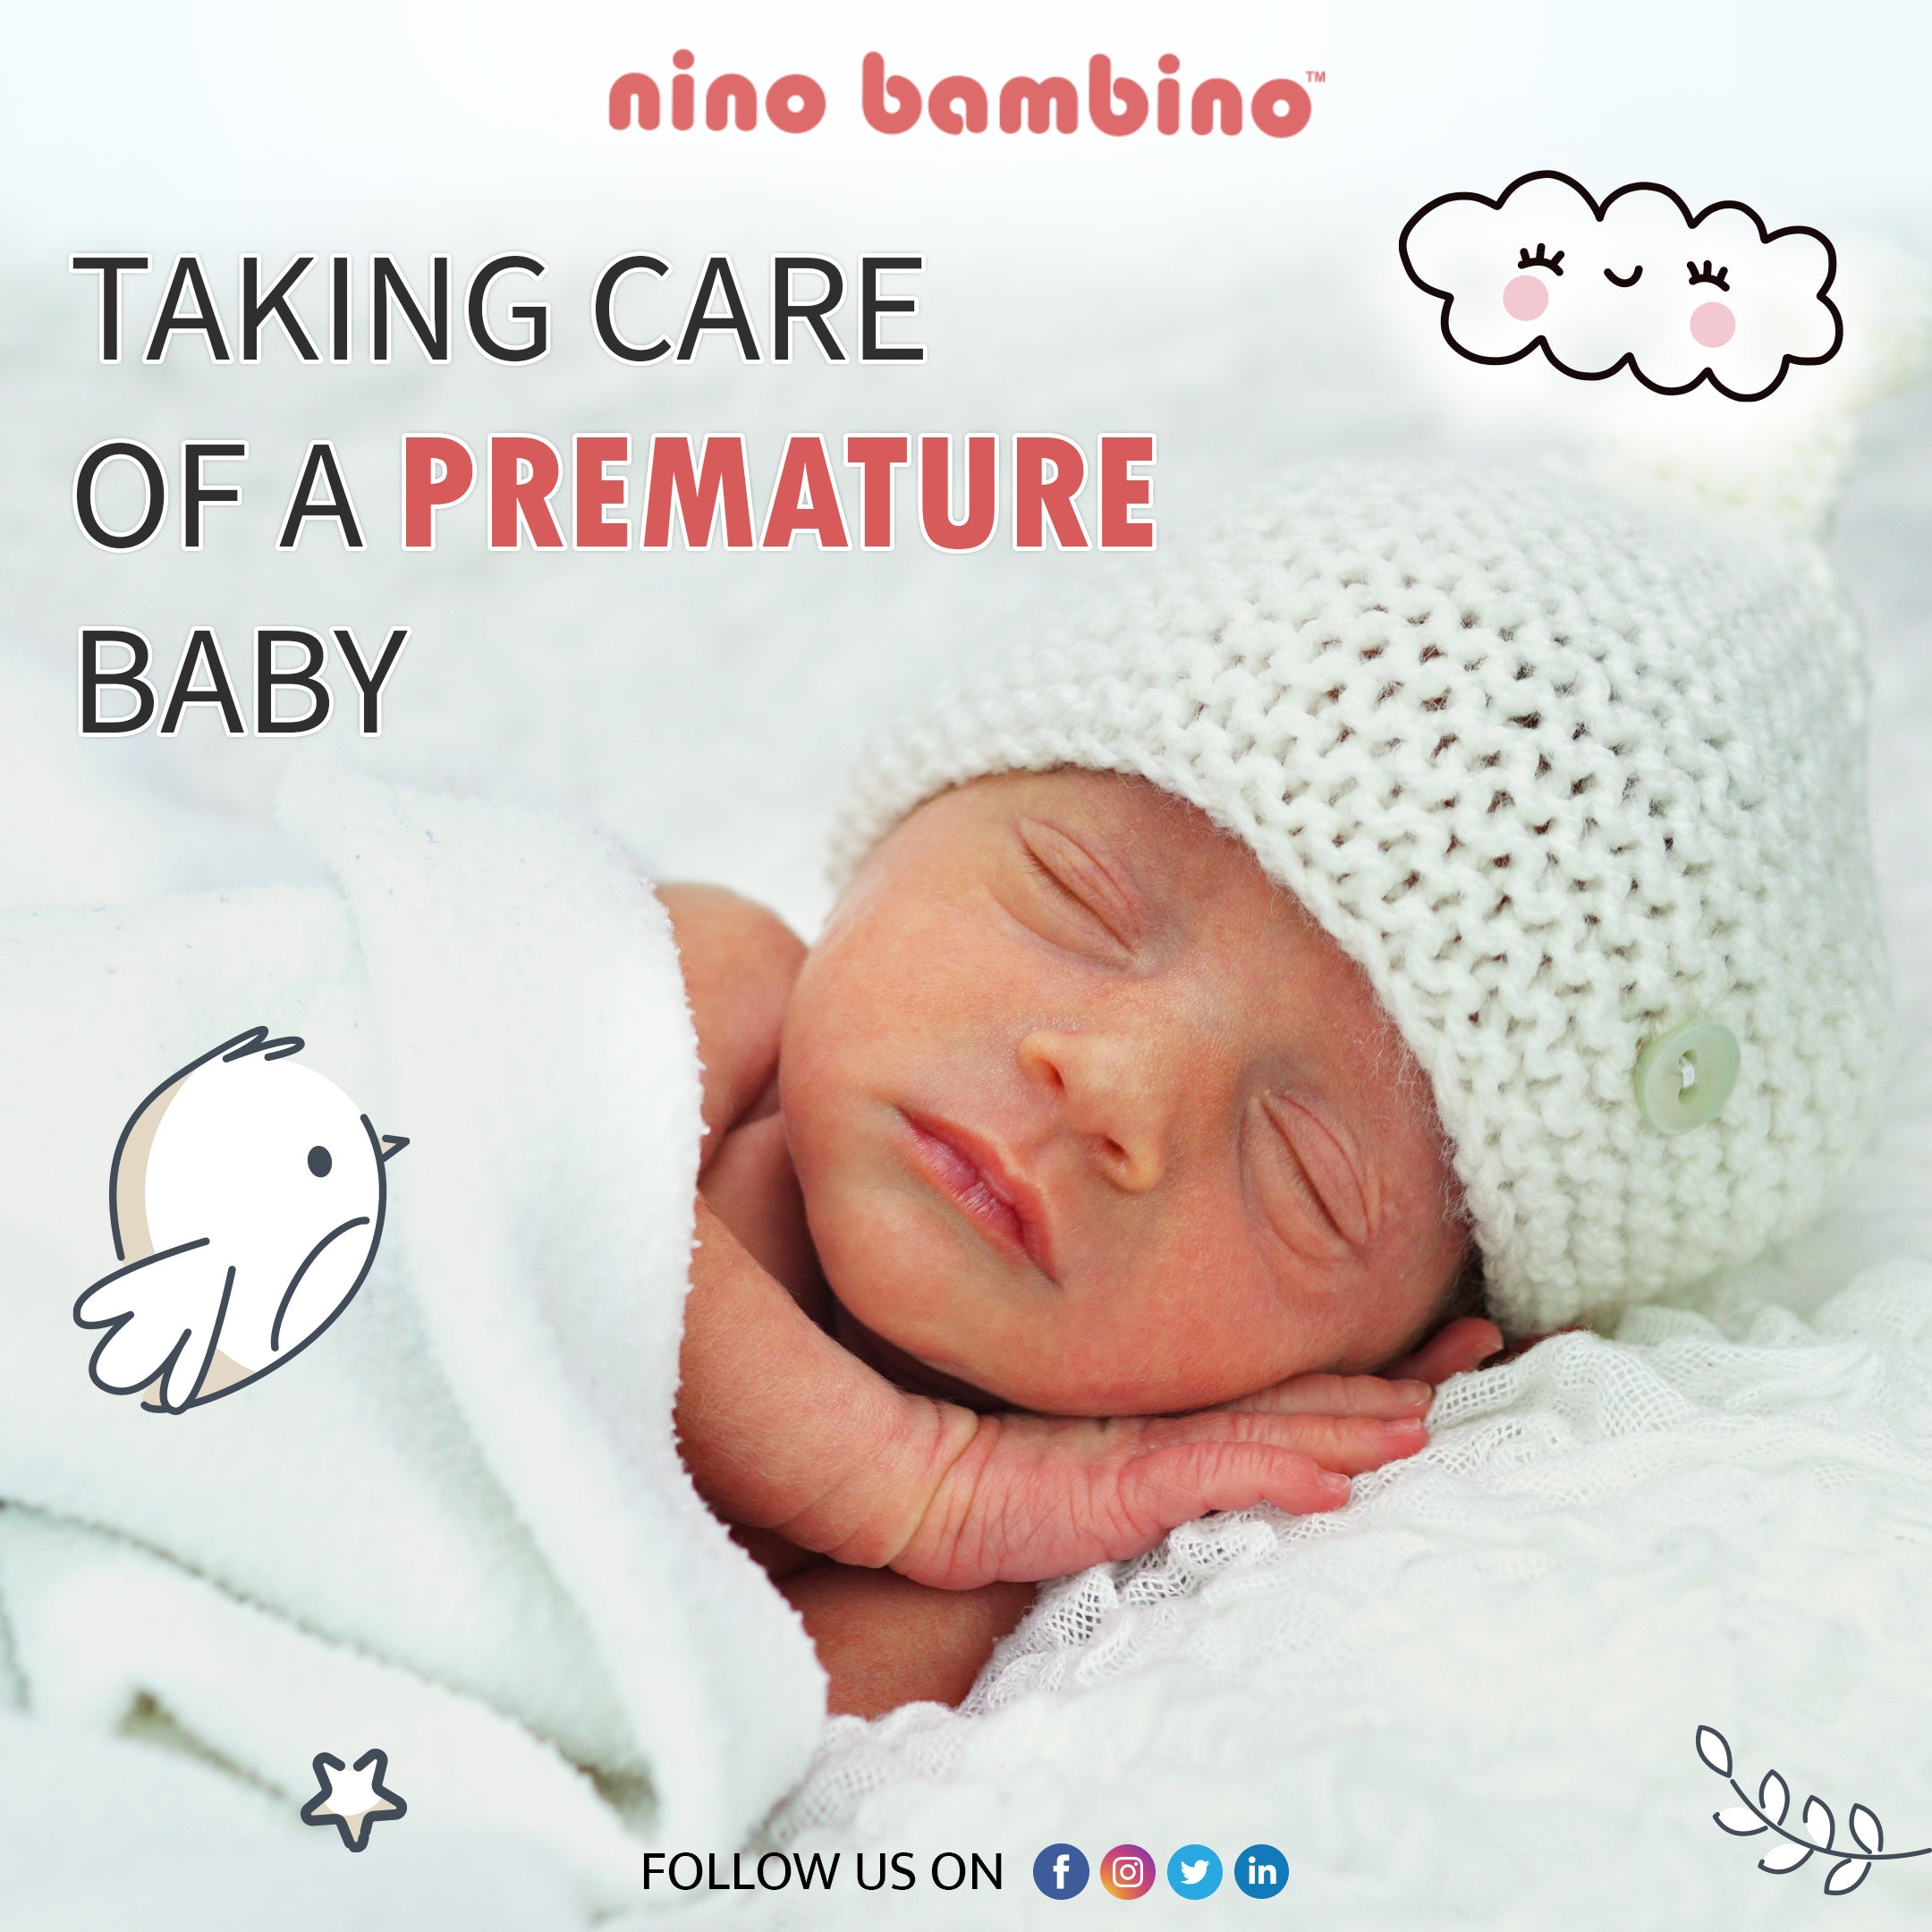 9 BEST GUIDELINES - TAKING CARE OF A PREMATURE BABY